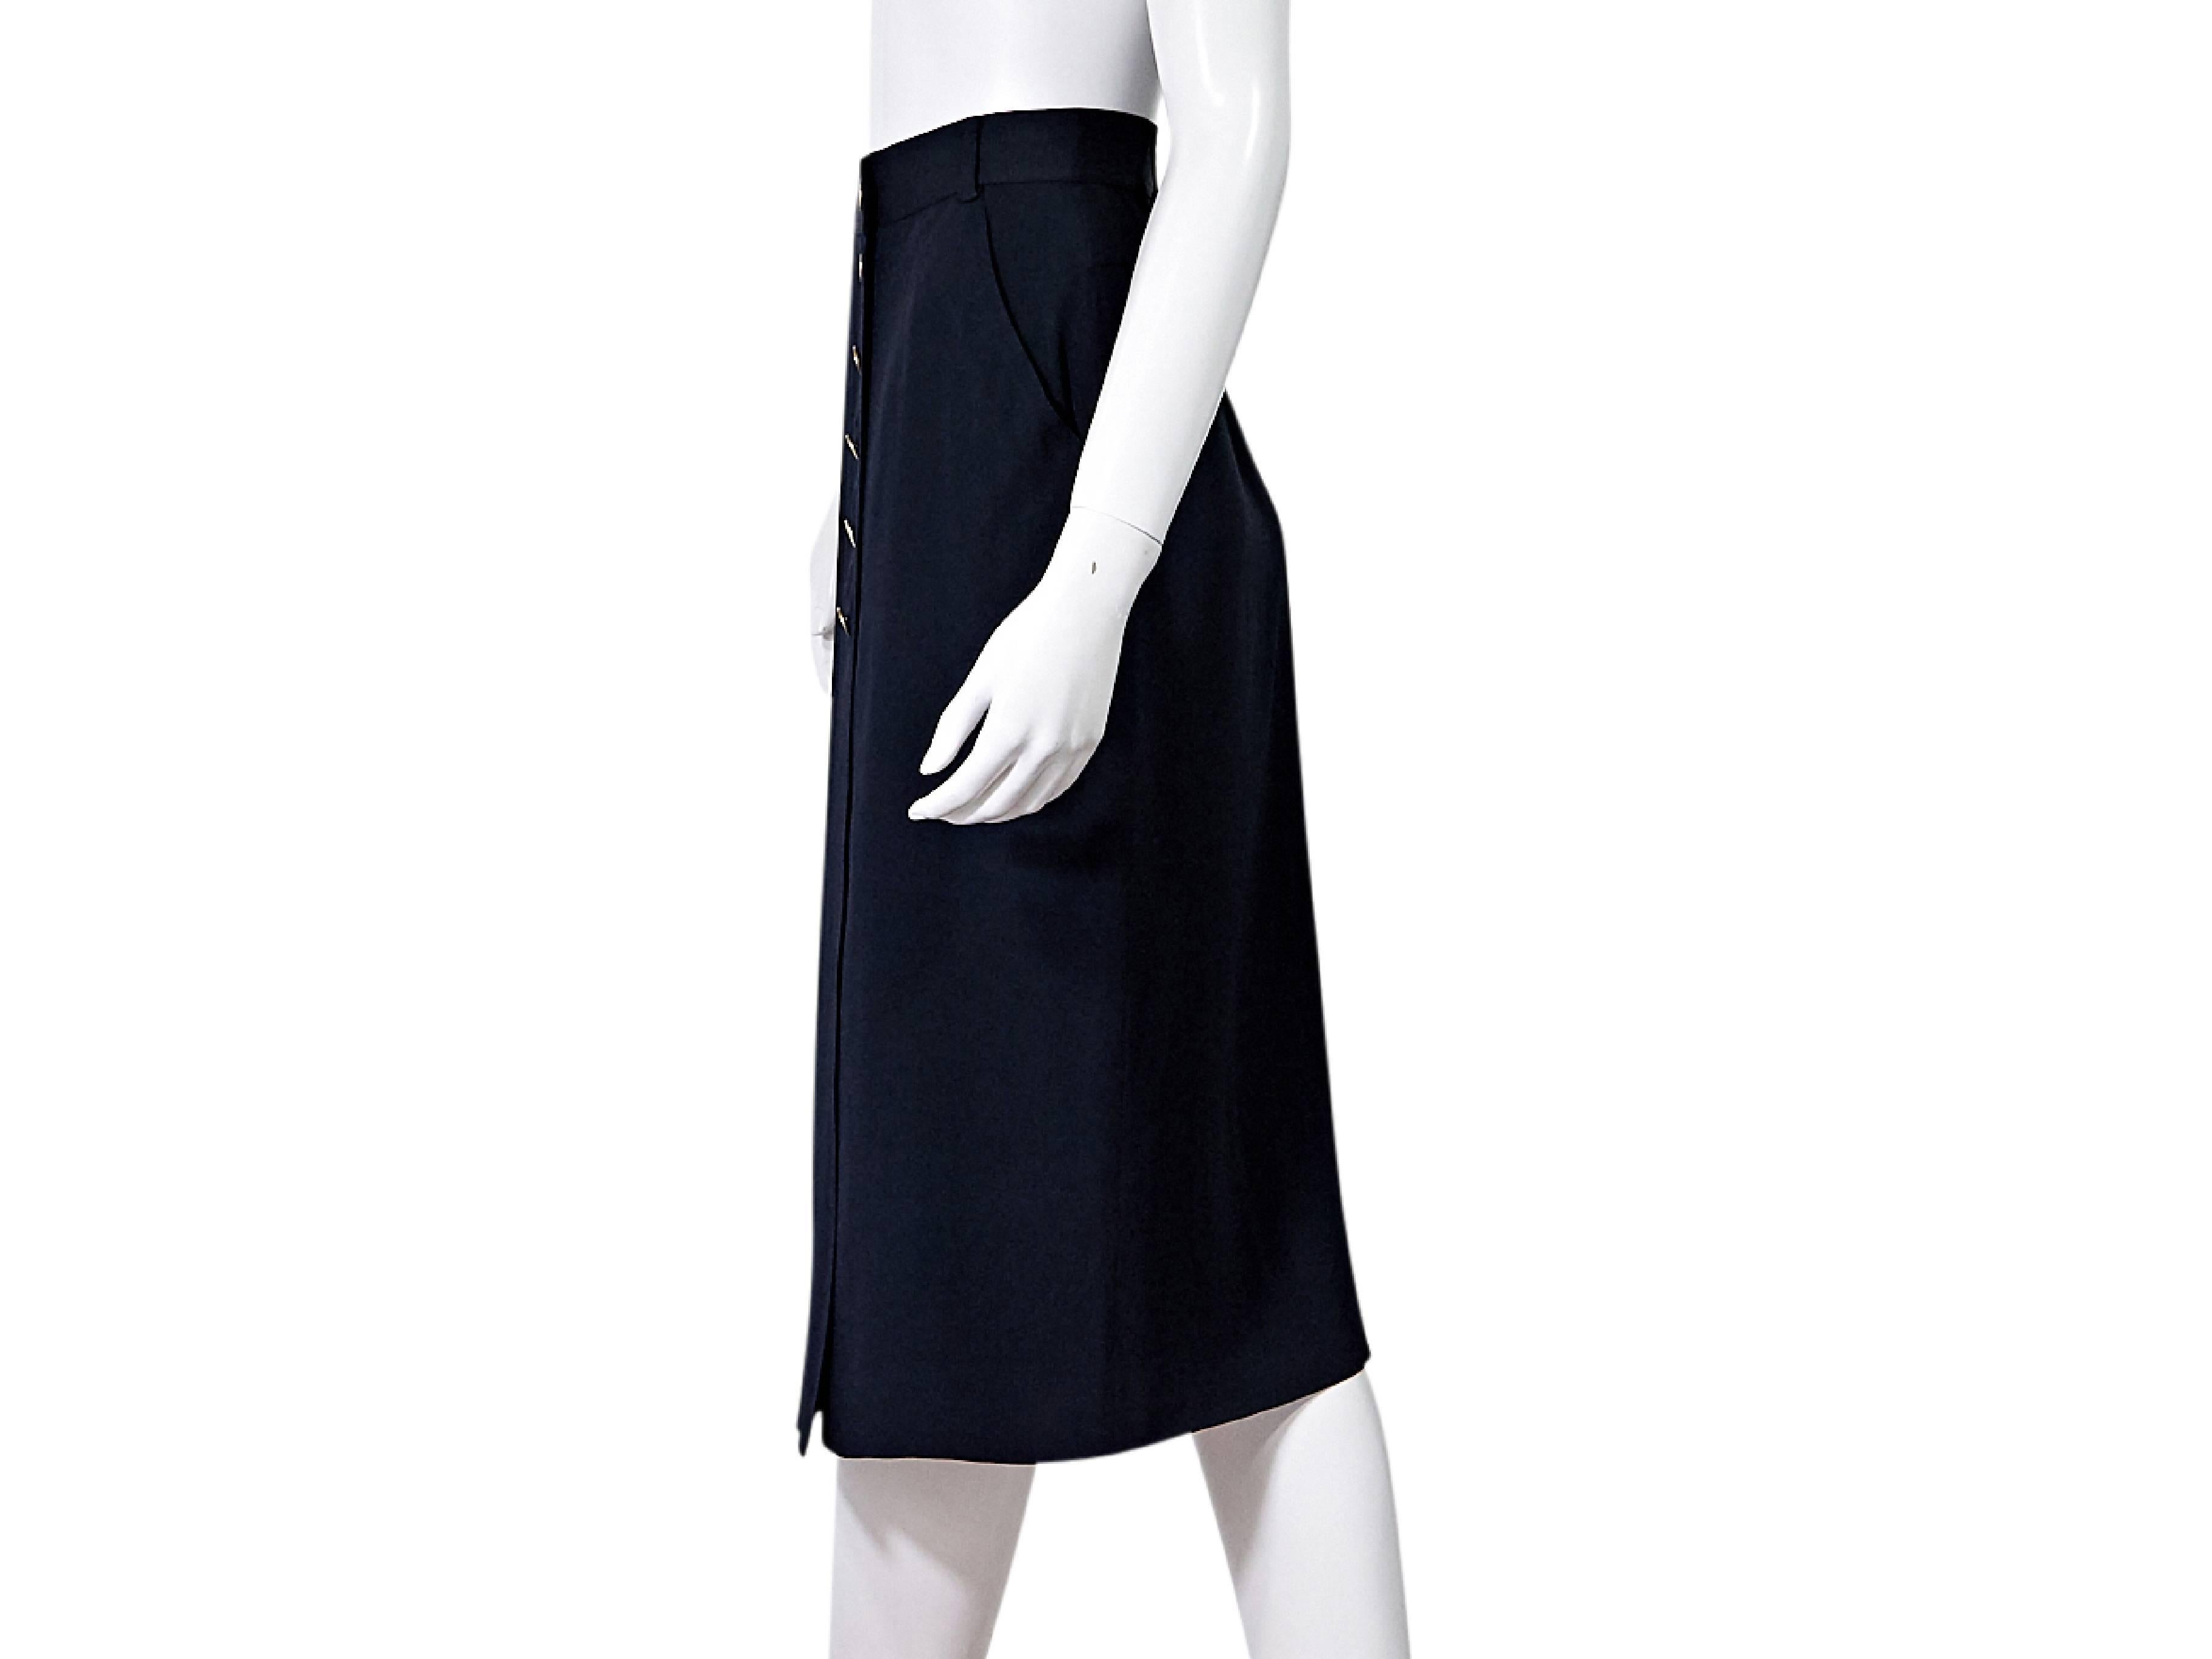 Product details:  Navy blue silk pencil skirt by Chanel.  Banded waist with belt loops.  Button-front closure. 
Condition: Pre-owned. Very good.
Est. Retail: $ 898.00